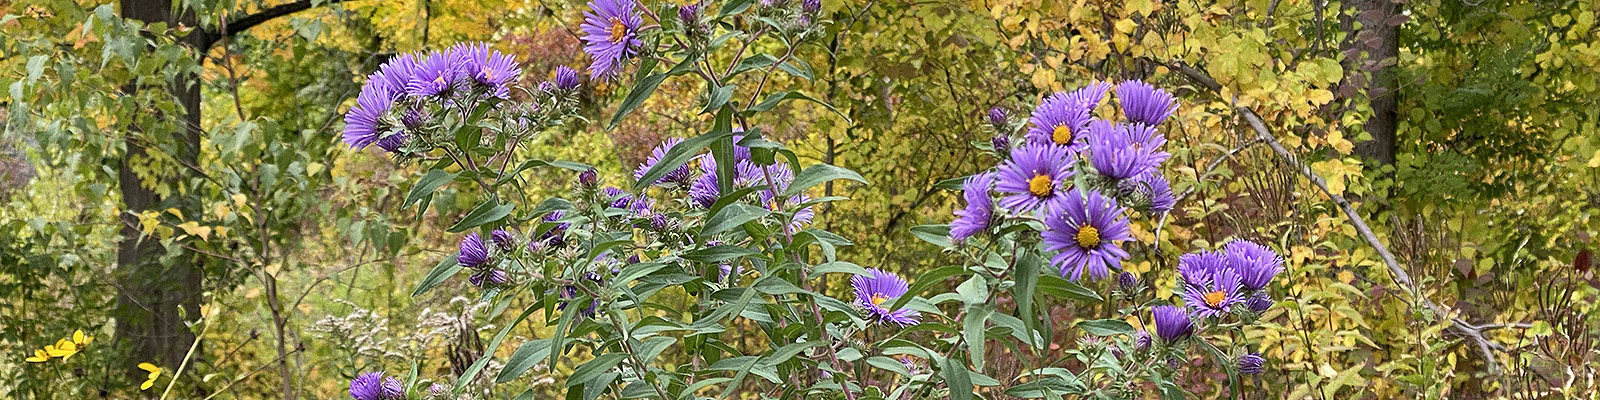 asters at Mary Cummings park